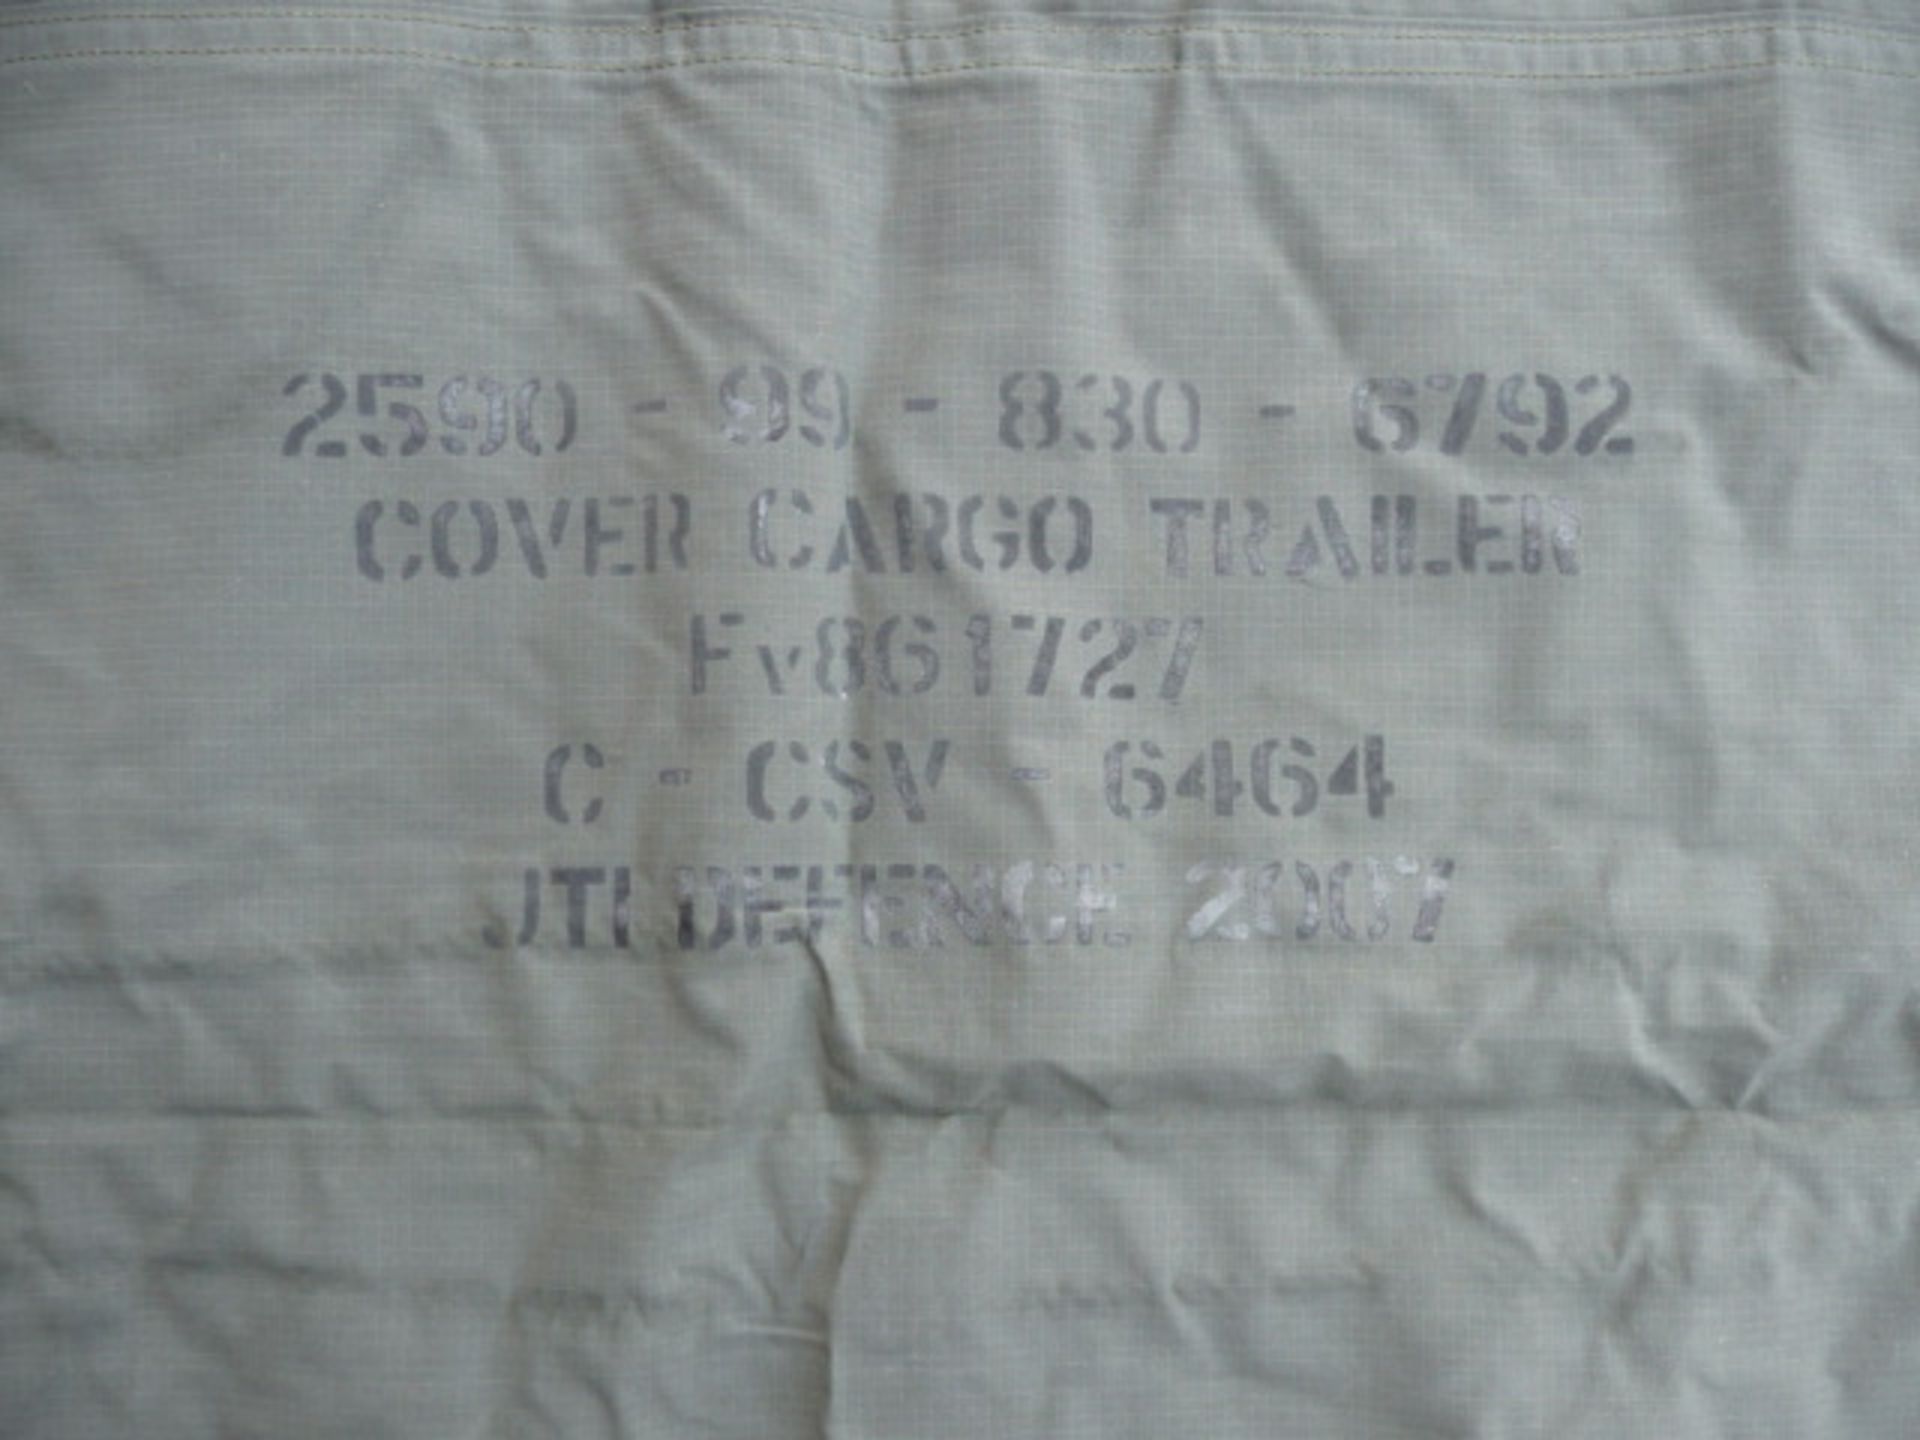 unissued new old stock Sankey Trailer Cover - Image 3 of 4